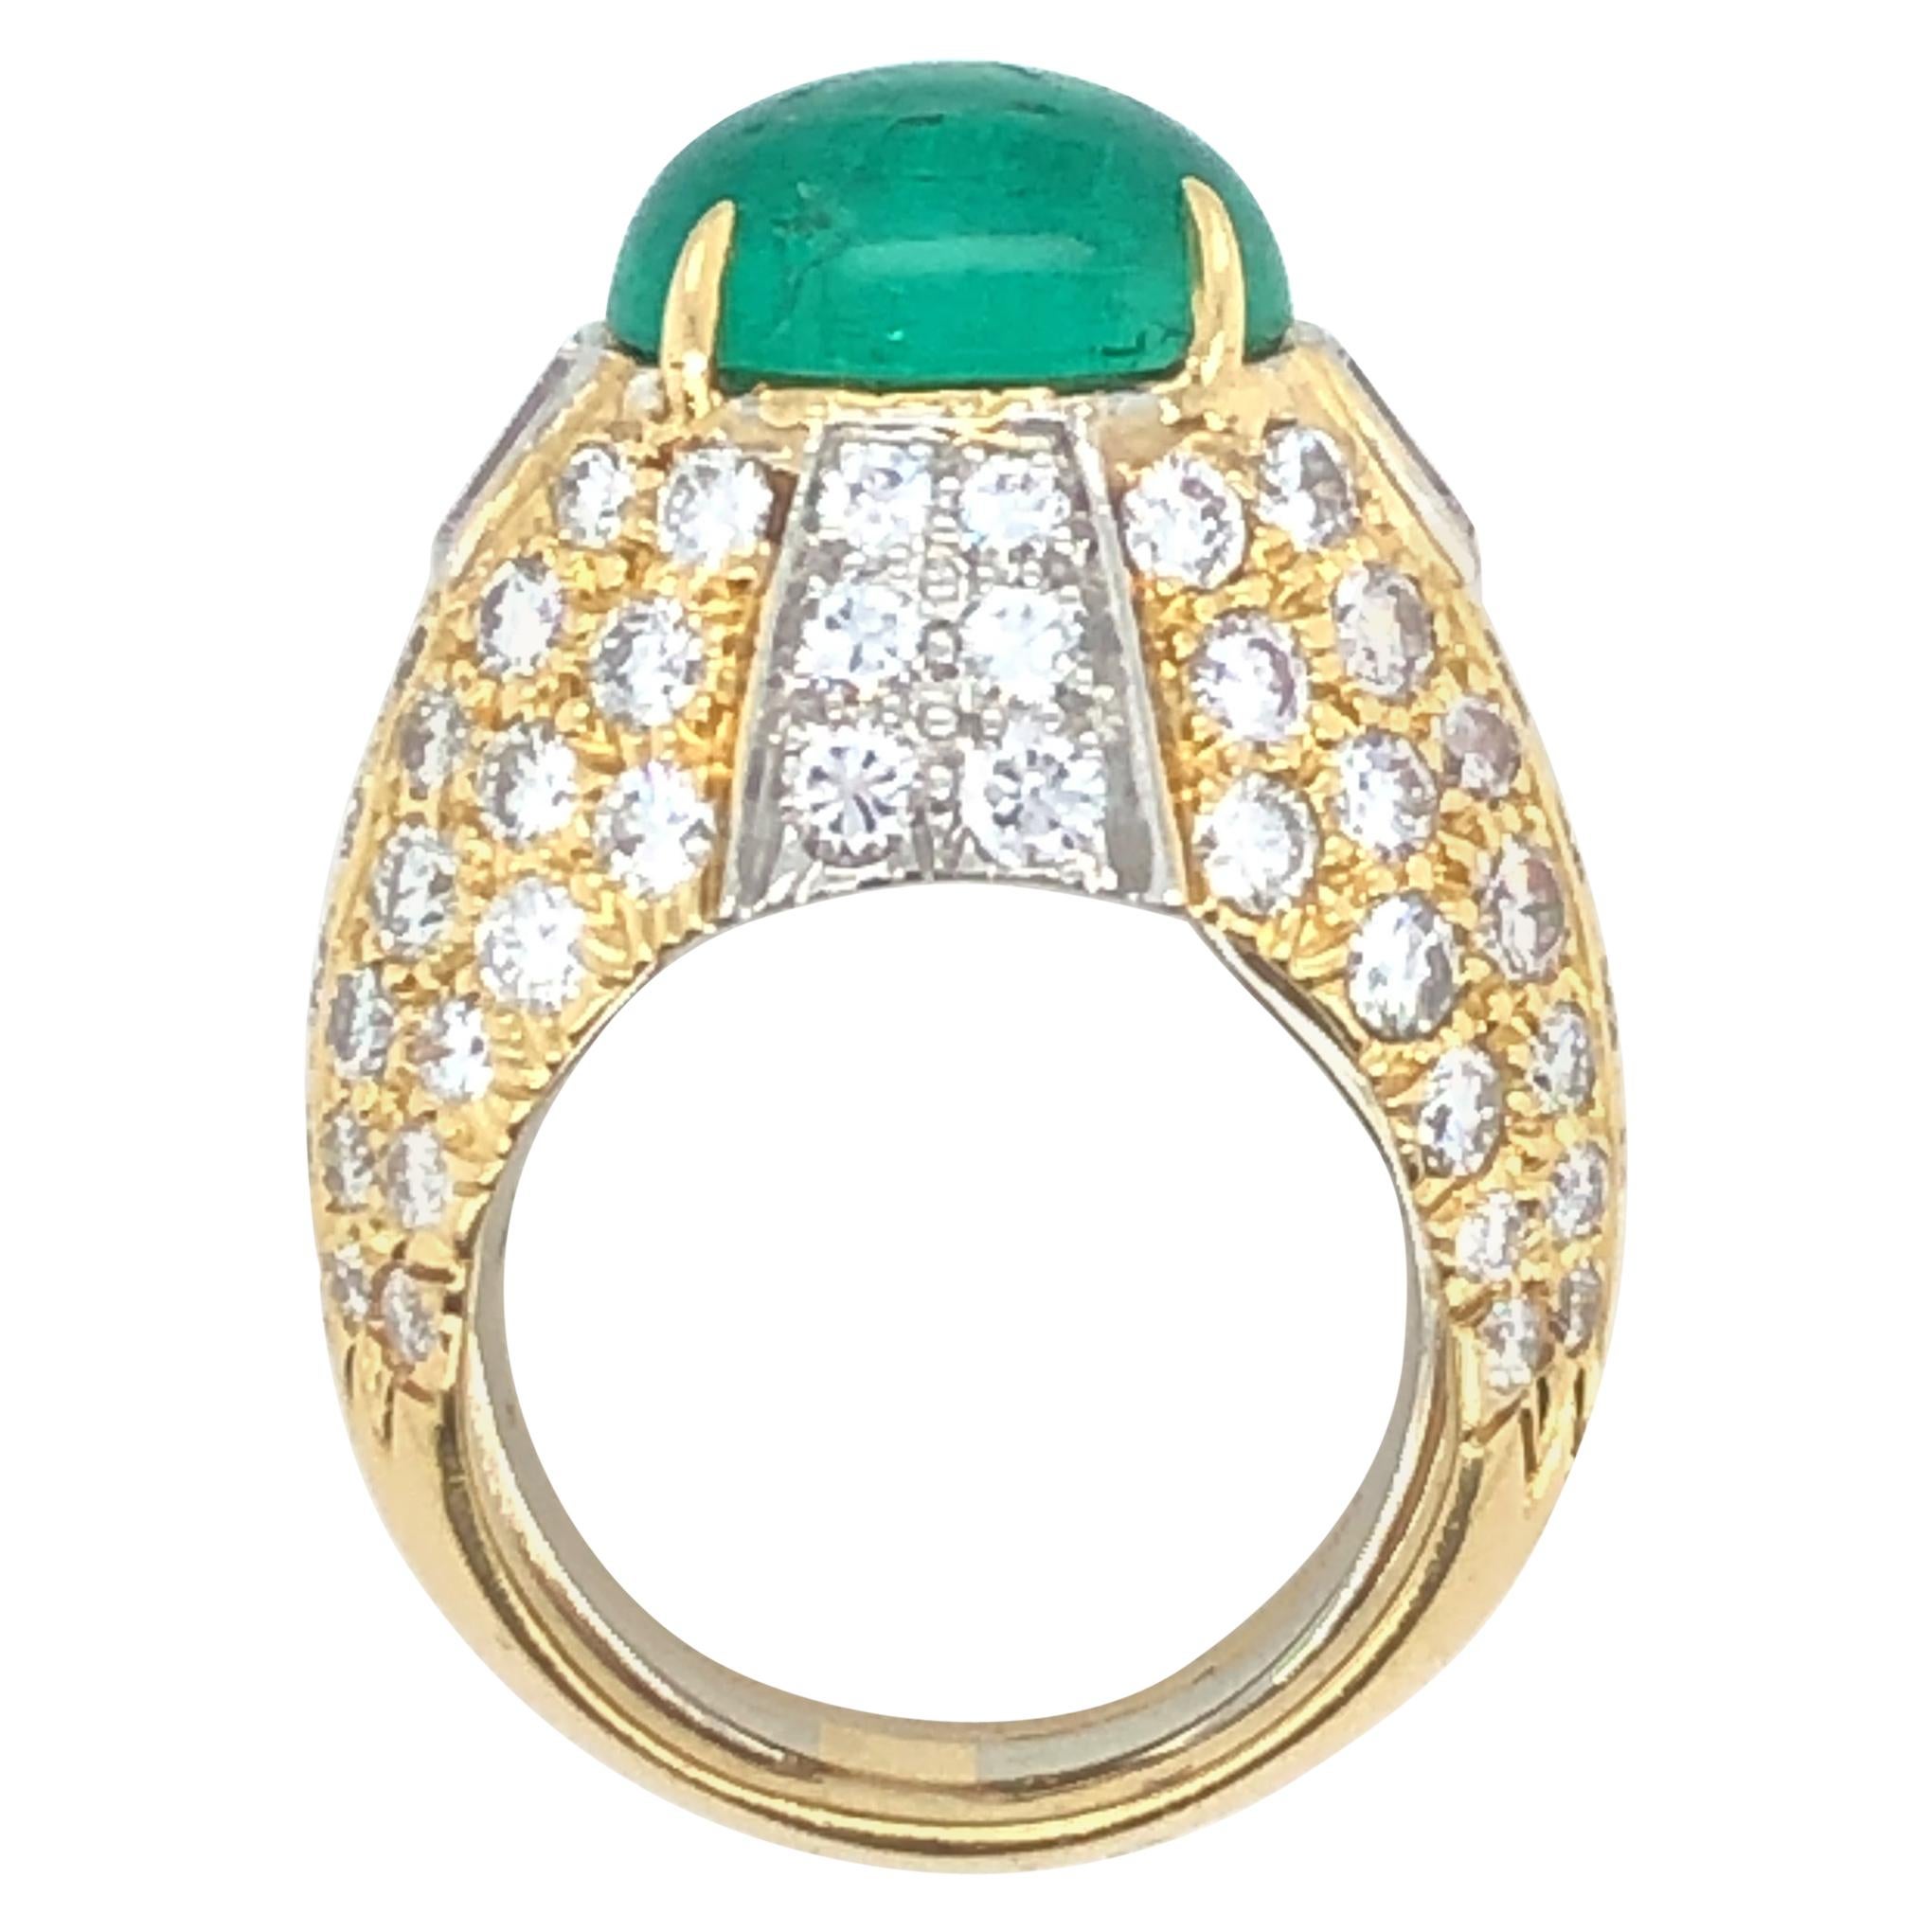 David Webb 4.5 Carat Cabochon Emerald and Diamond Ring in Gold and Platinum For Sale